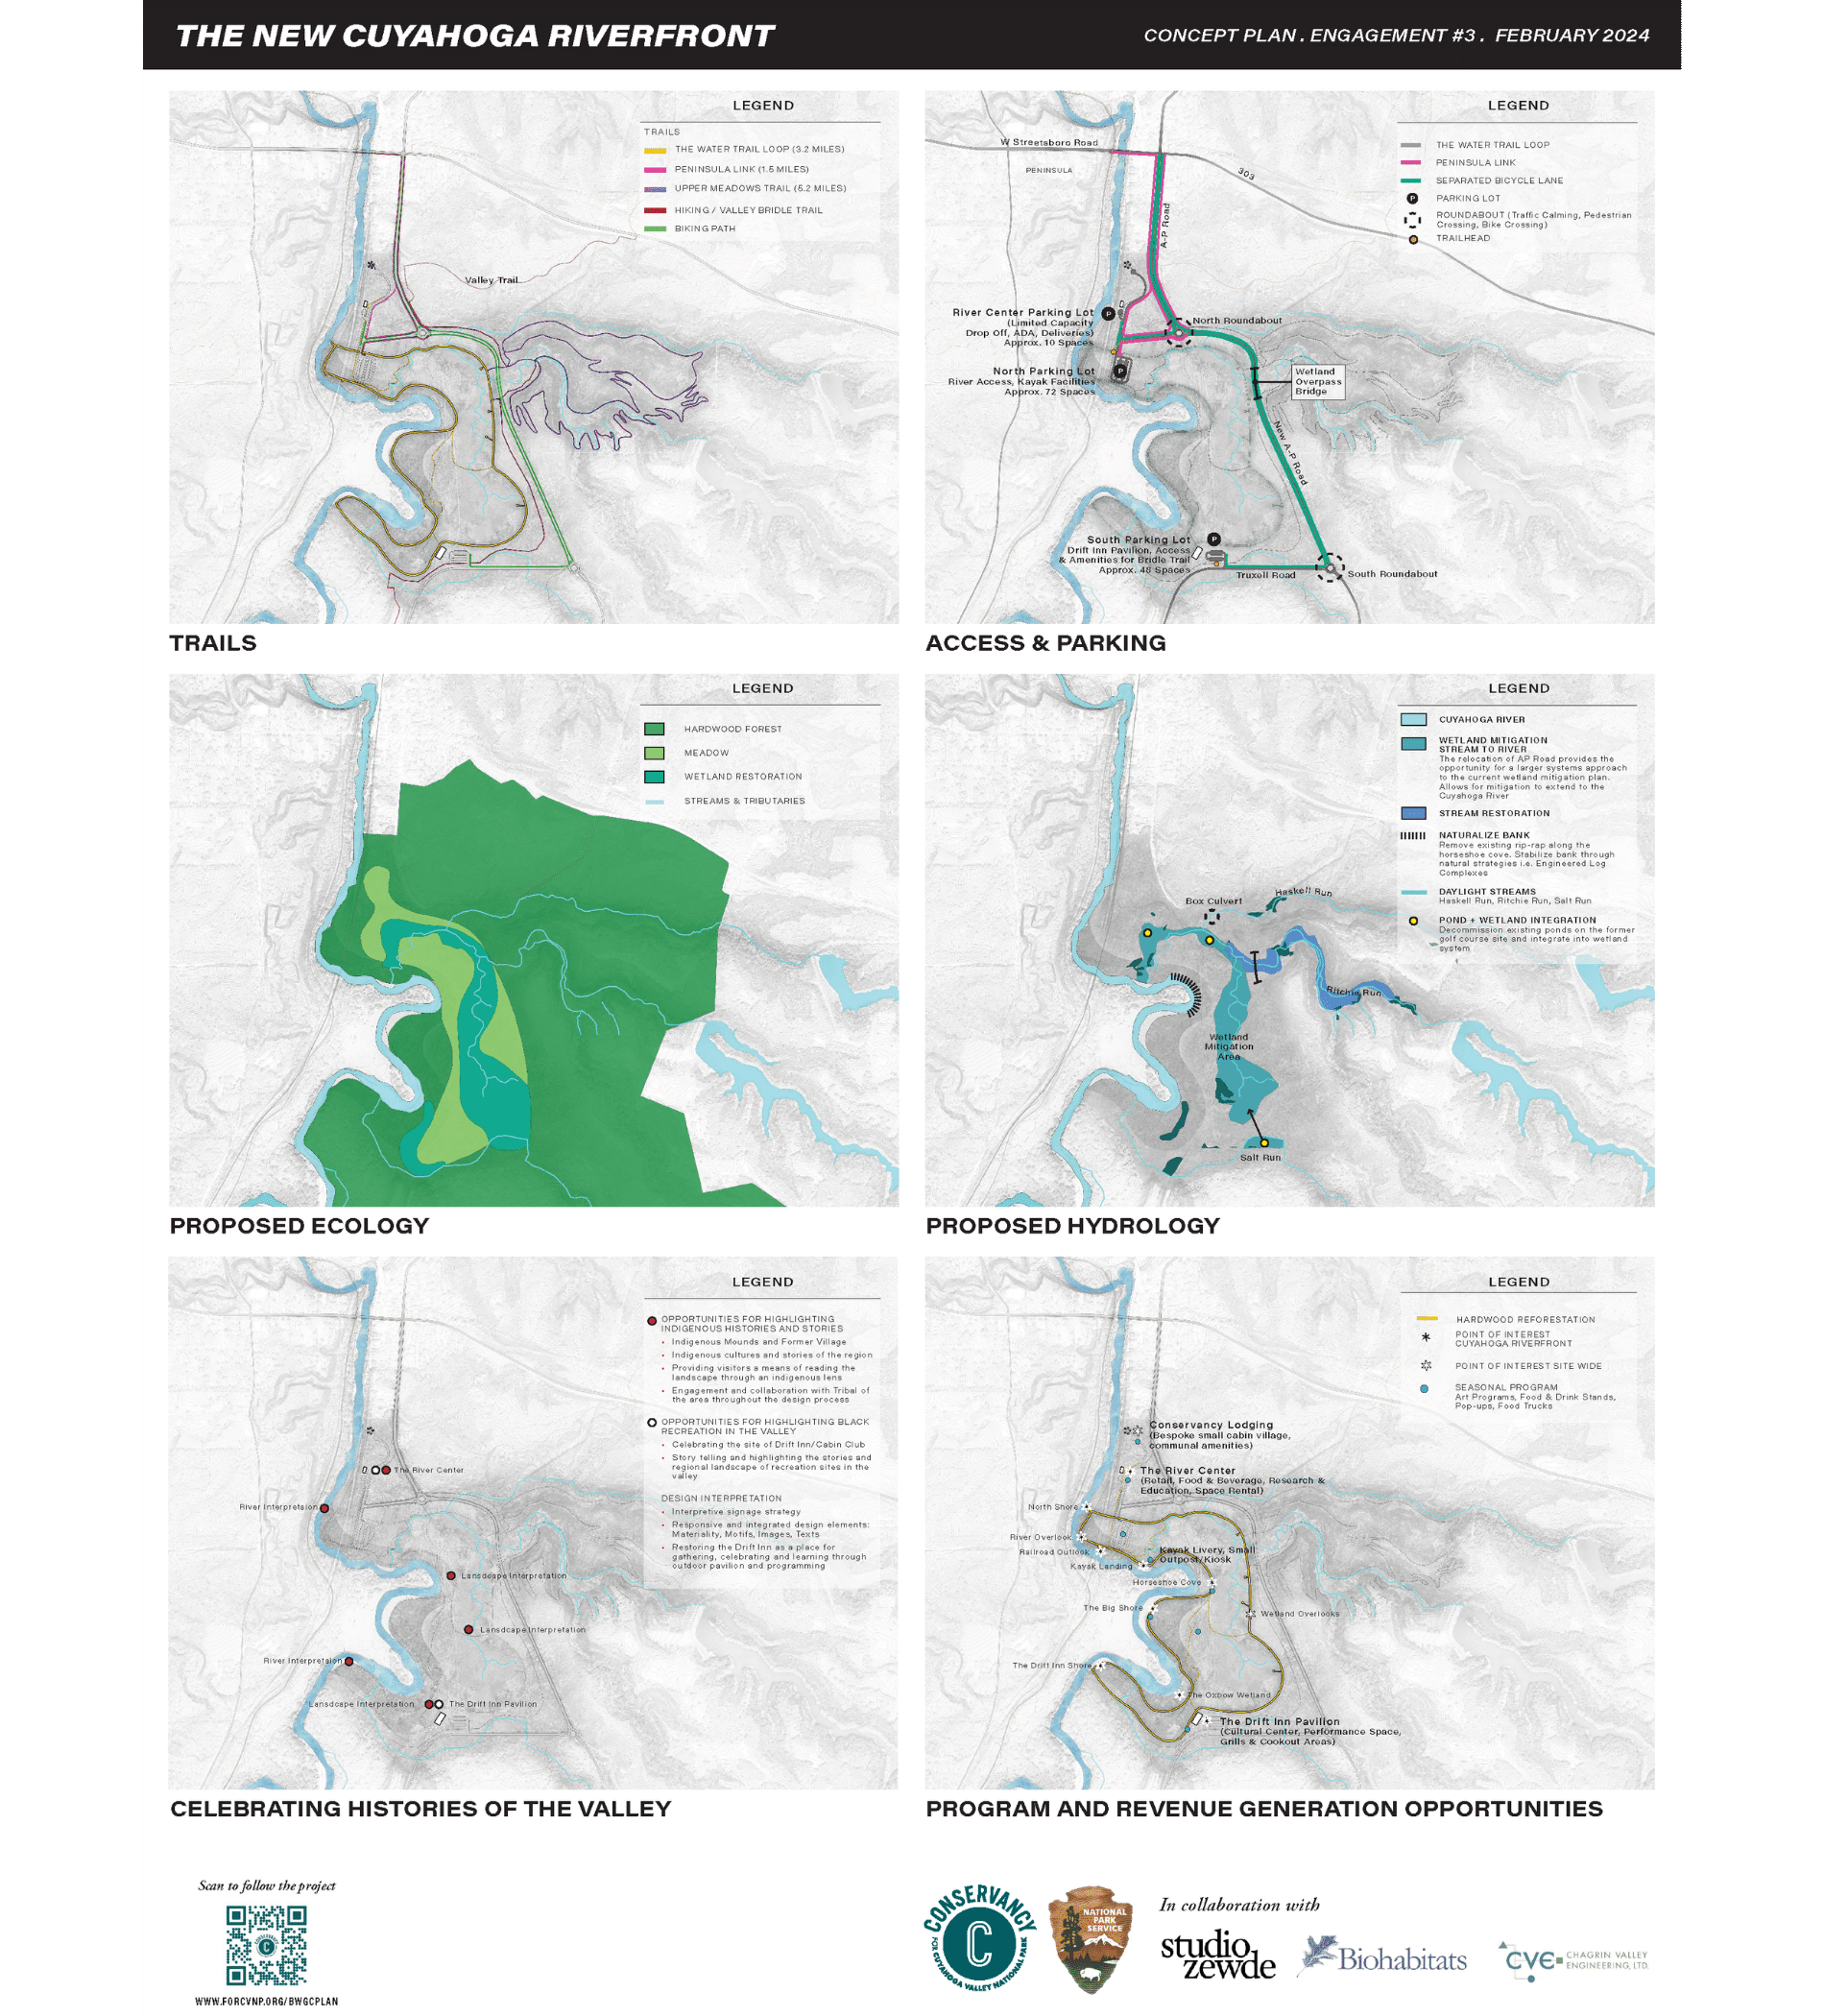 Six small maps show a framework view of what trails, access and parking, proposed ecology, proposed hydrology, celebrating histories of the valley as well as program and revenue generation opportunities for the former Brandywine Golf Course.